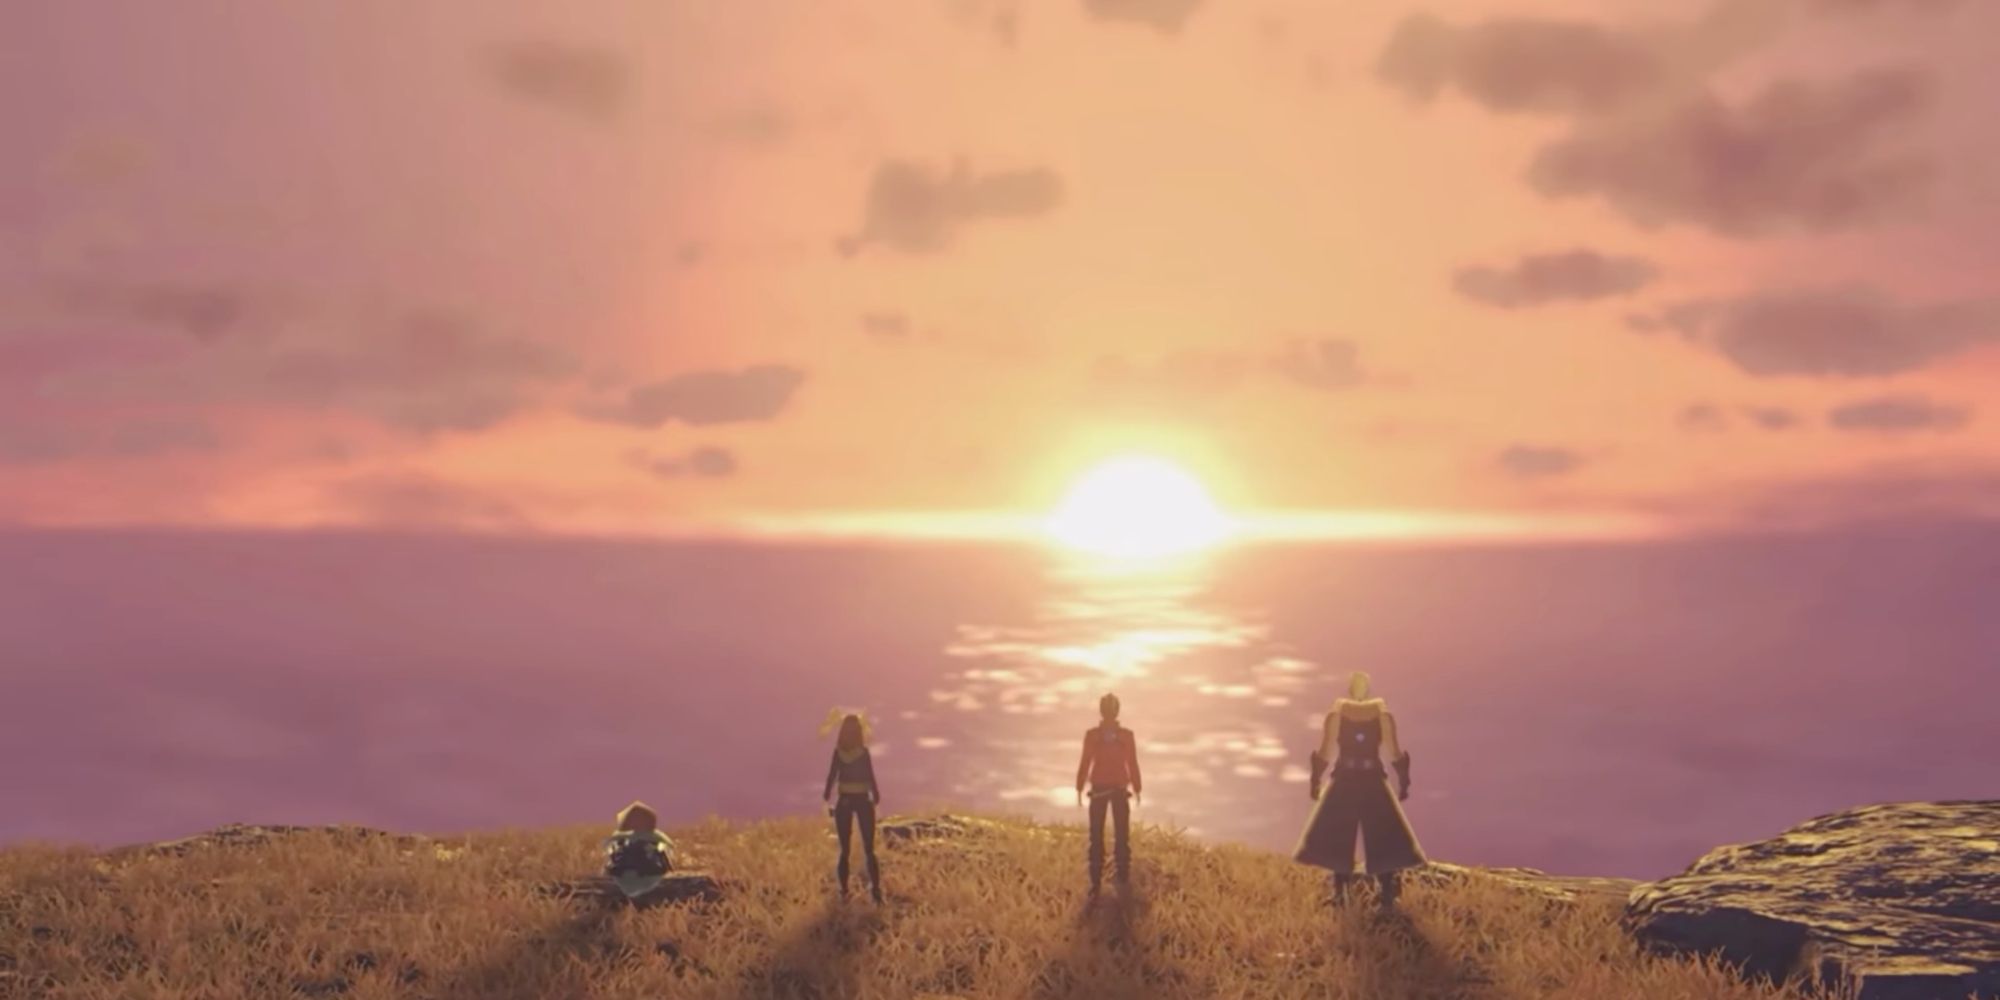 A screenshot from Xenoblade Chronicles 3's ending, showing Noah and the party looking at a sunset over the horizon